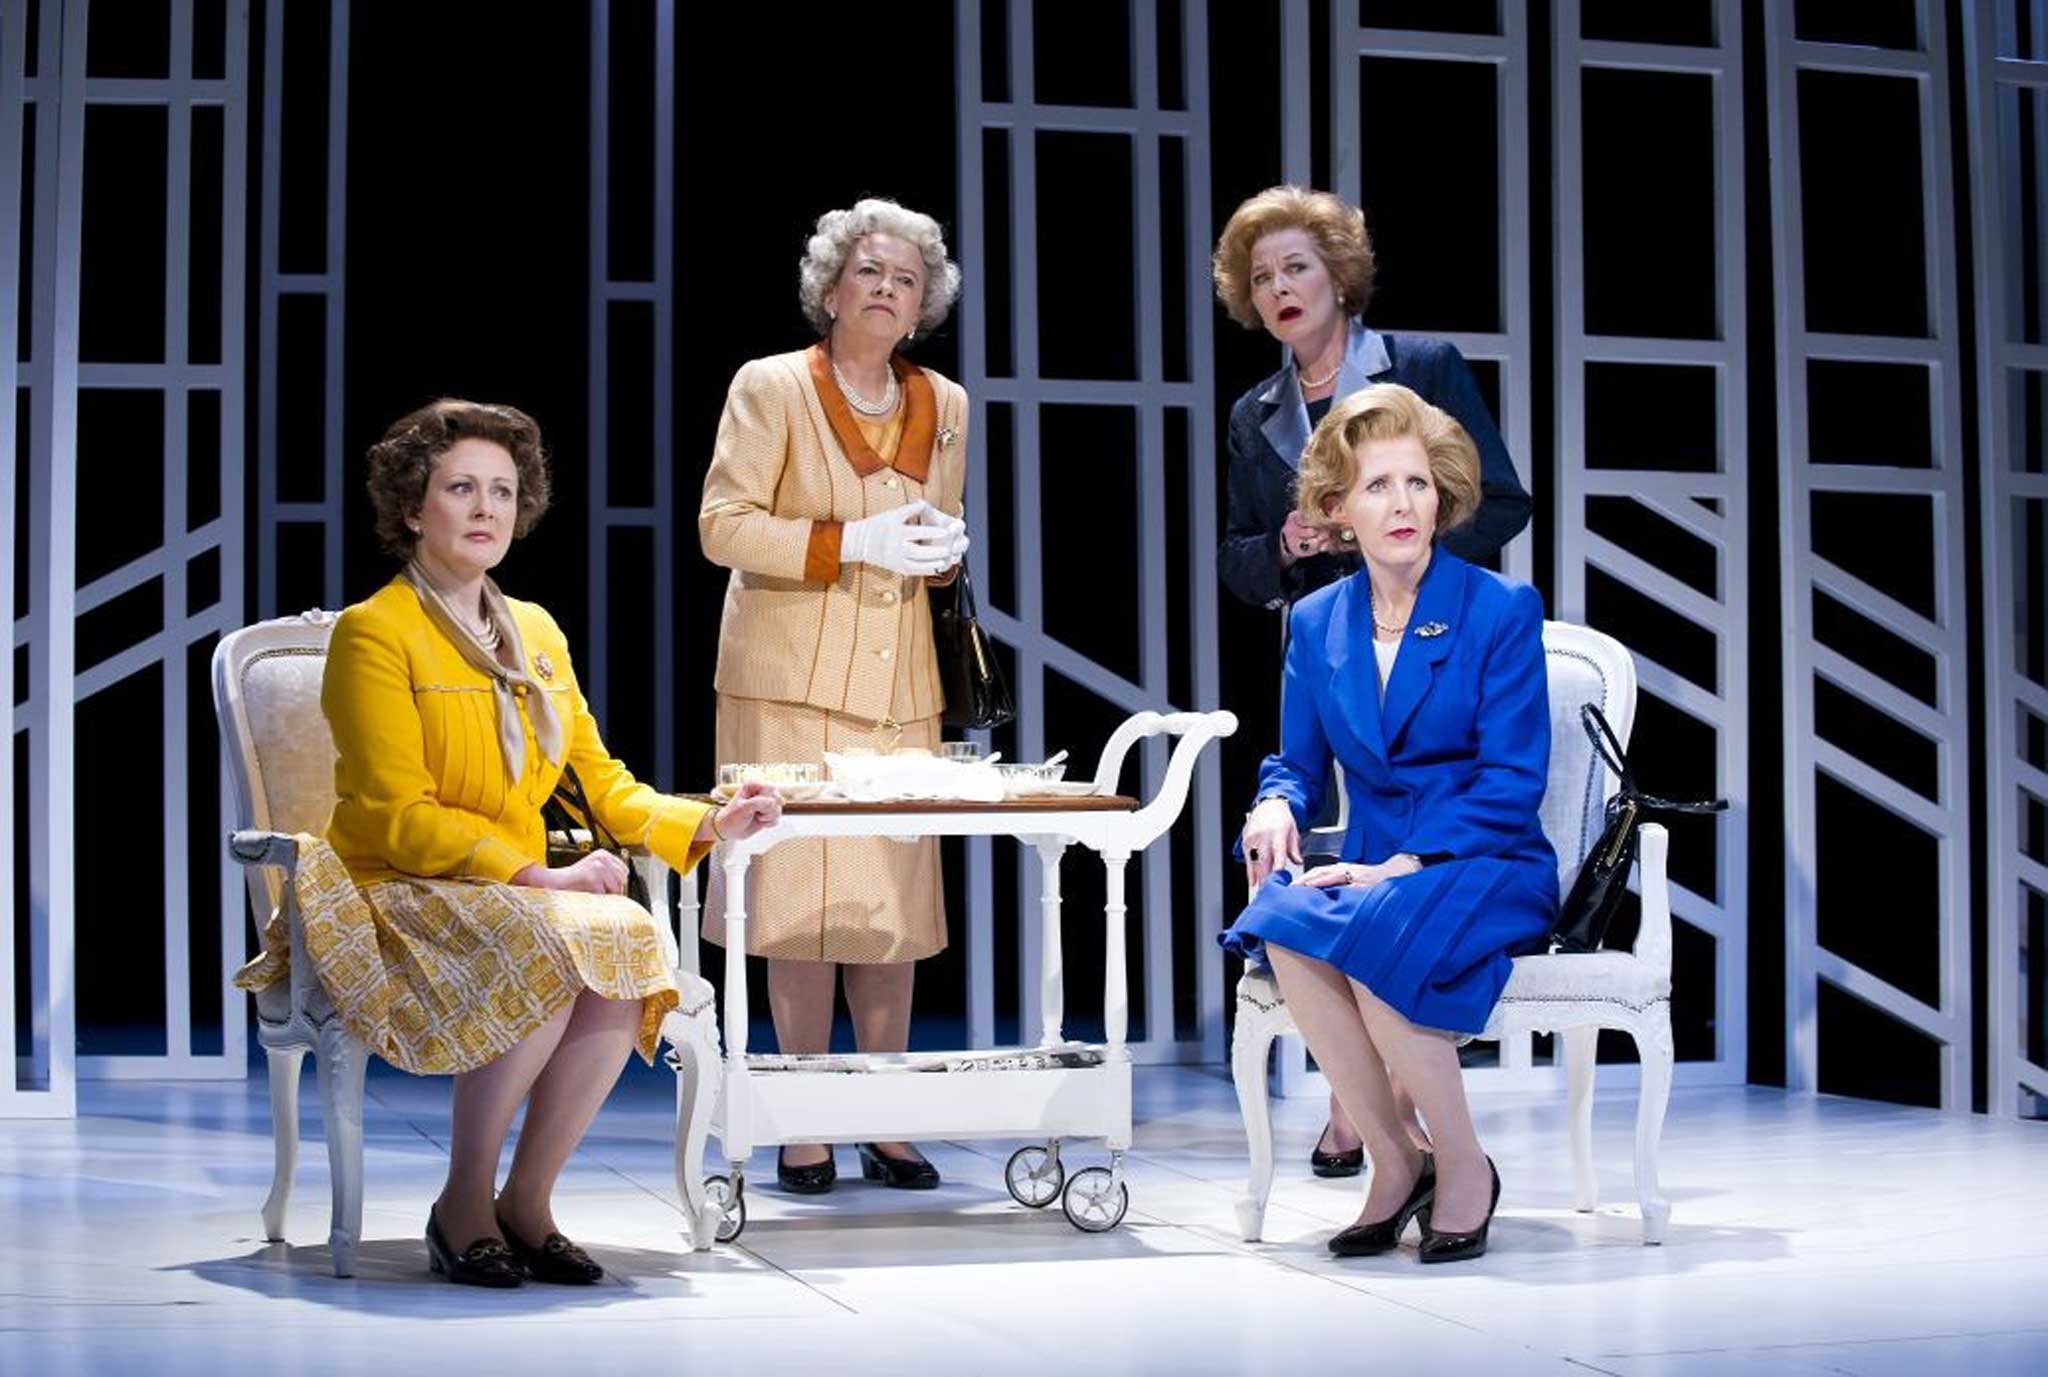 Playful drama: Handbagged takes a mischievous look at the weekly meetings between the Queen and Thatcher